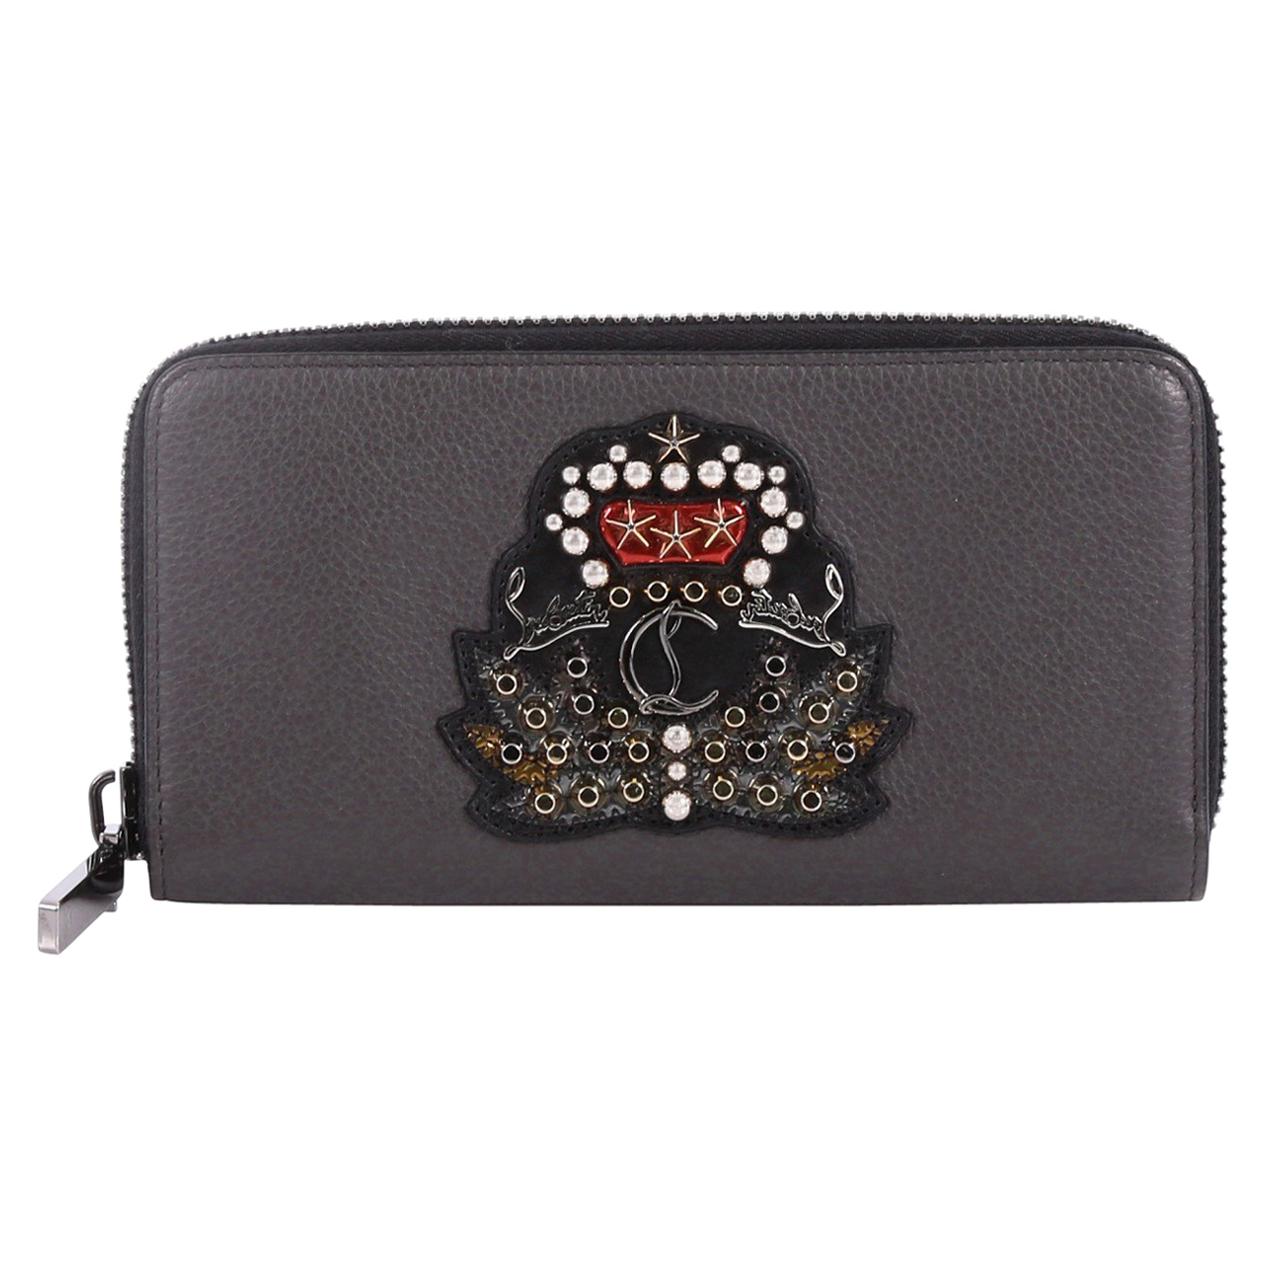 Christian Louboutin Panettone Wallet Embroidered Studded Leather